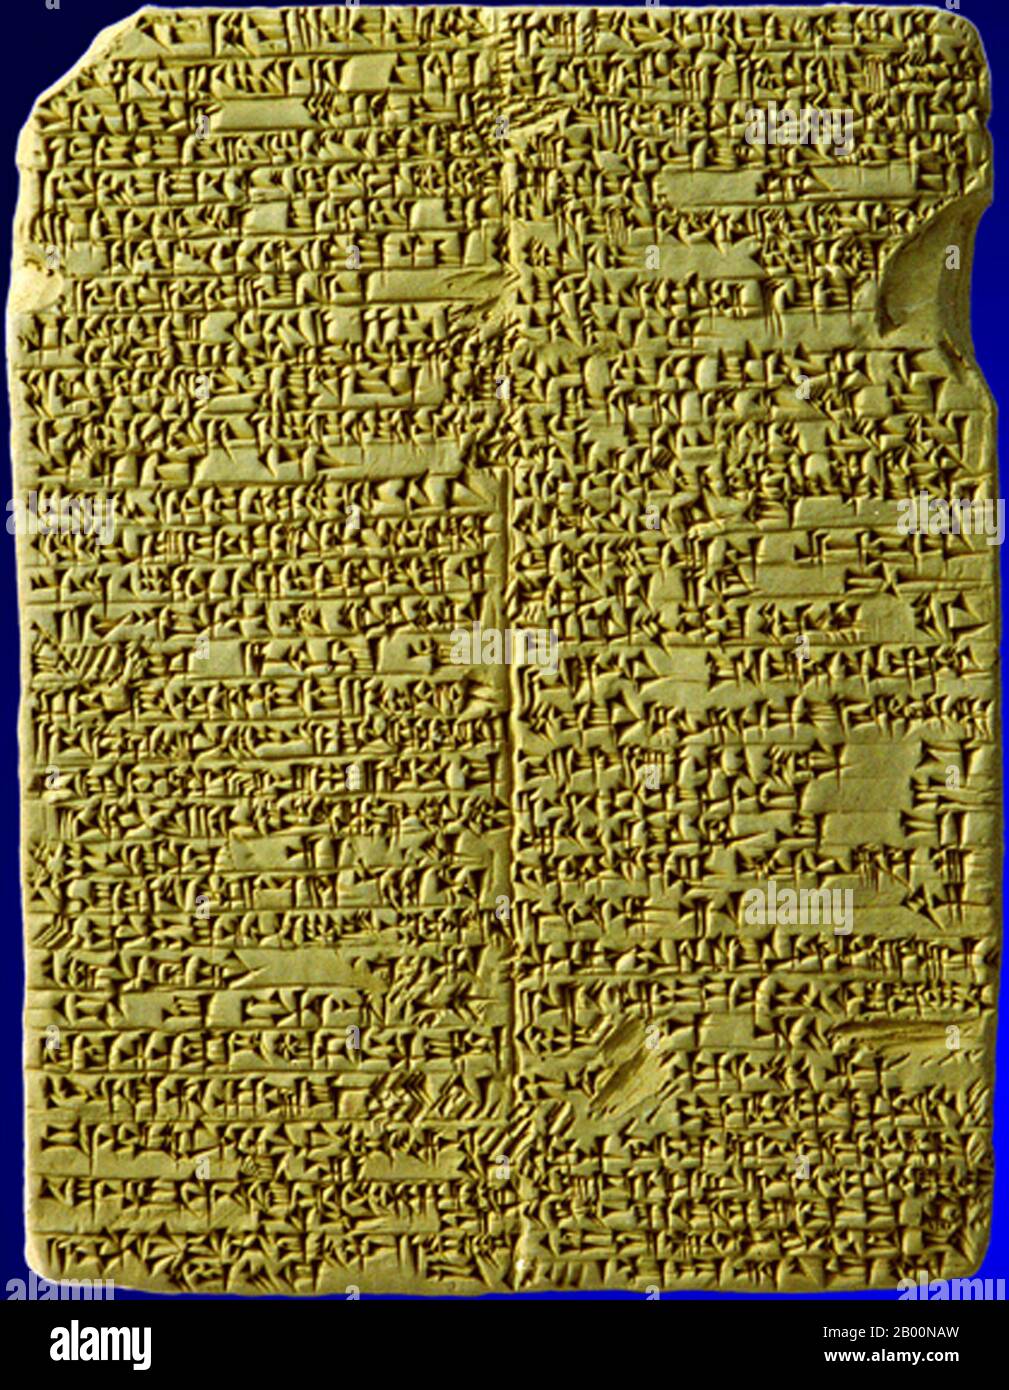 Iraq: Akkadian cuneiform inscription relating the story of Sargon of Akkad (c. 23rd – 22nd century BCE).  Akkadian is an extinct Semitic language (part of the greater Afroasiatic language family) that was spoken in ancient Mesopotamia. The earliest attested Semitic language, it used the cuneiform writing system derived ultimately from ancient Sumerian, an unrelated language isolate. The name of the language is derived from the city of Akkad, a major center of Mesopotamian civilization. Stock Photo